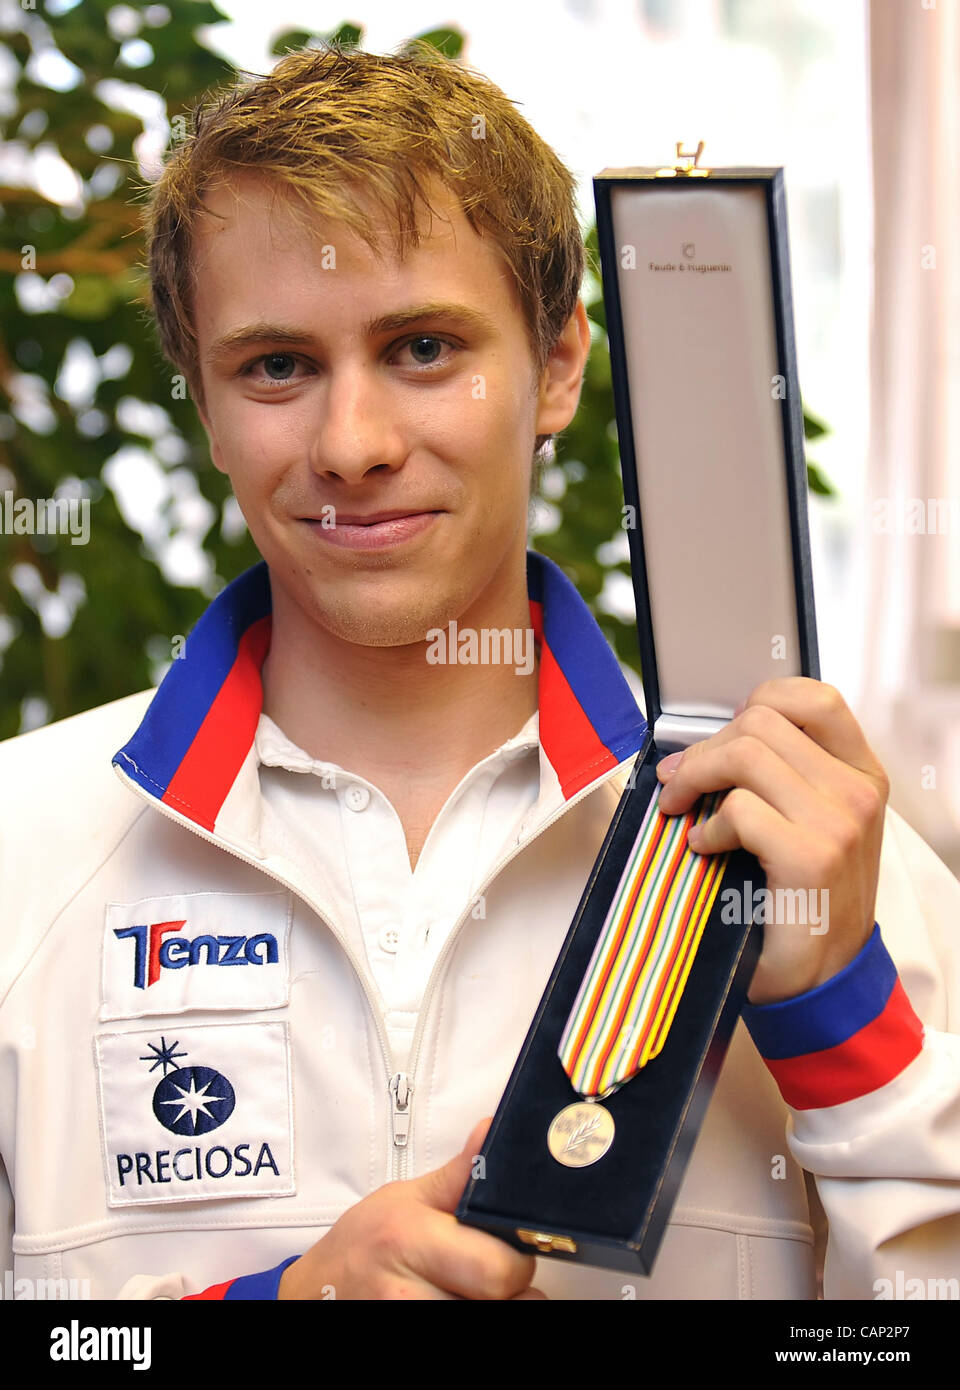 Czech figure skater Michal Brezina shows little medal for the short programme during press conference in Prague, Czech Republic on April 3, 2012 after his arrival from the Ice skating World Cup. (CTK Photo/Igor Sefr) Stock Photo